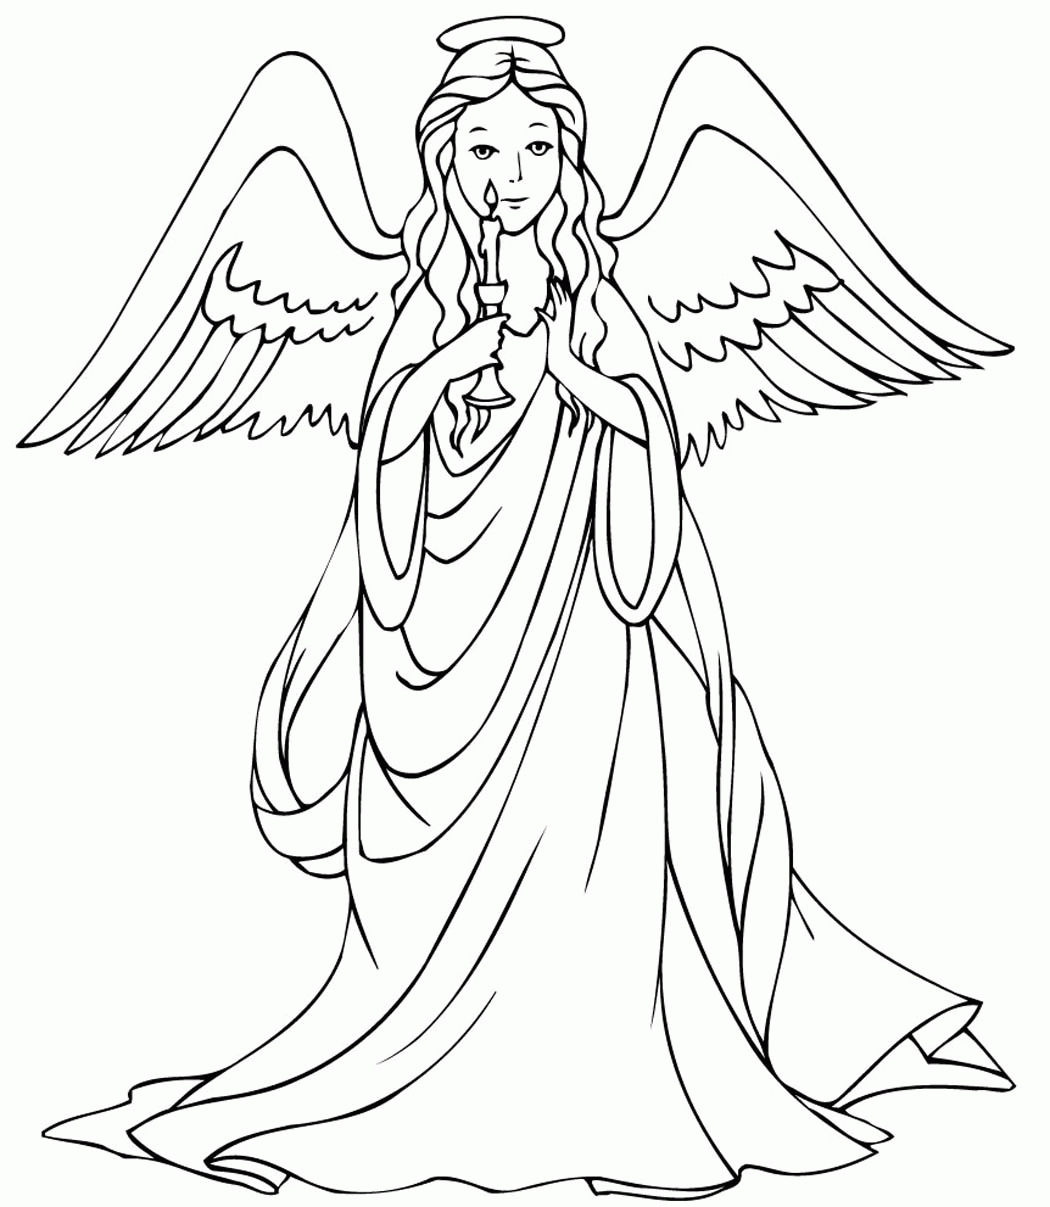 Angel Wings Coloring Pages Teens | Coloring Pages For All Ages